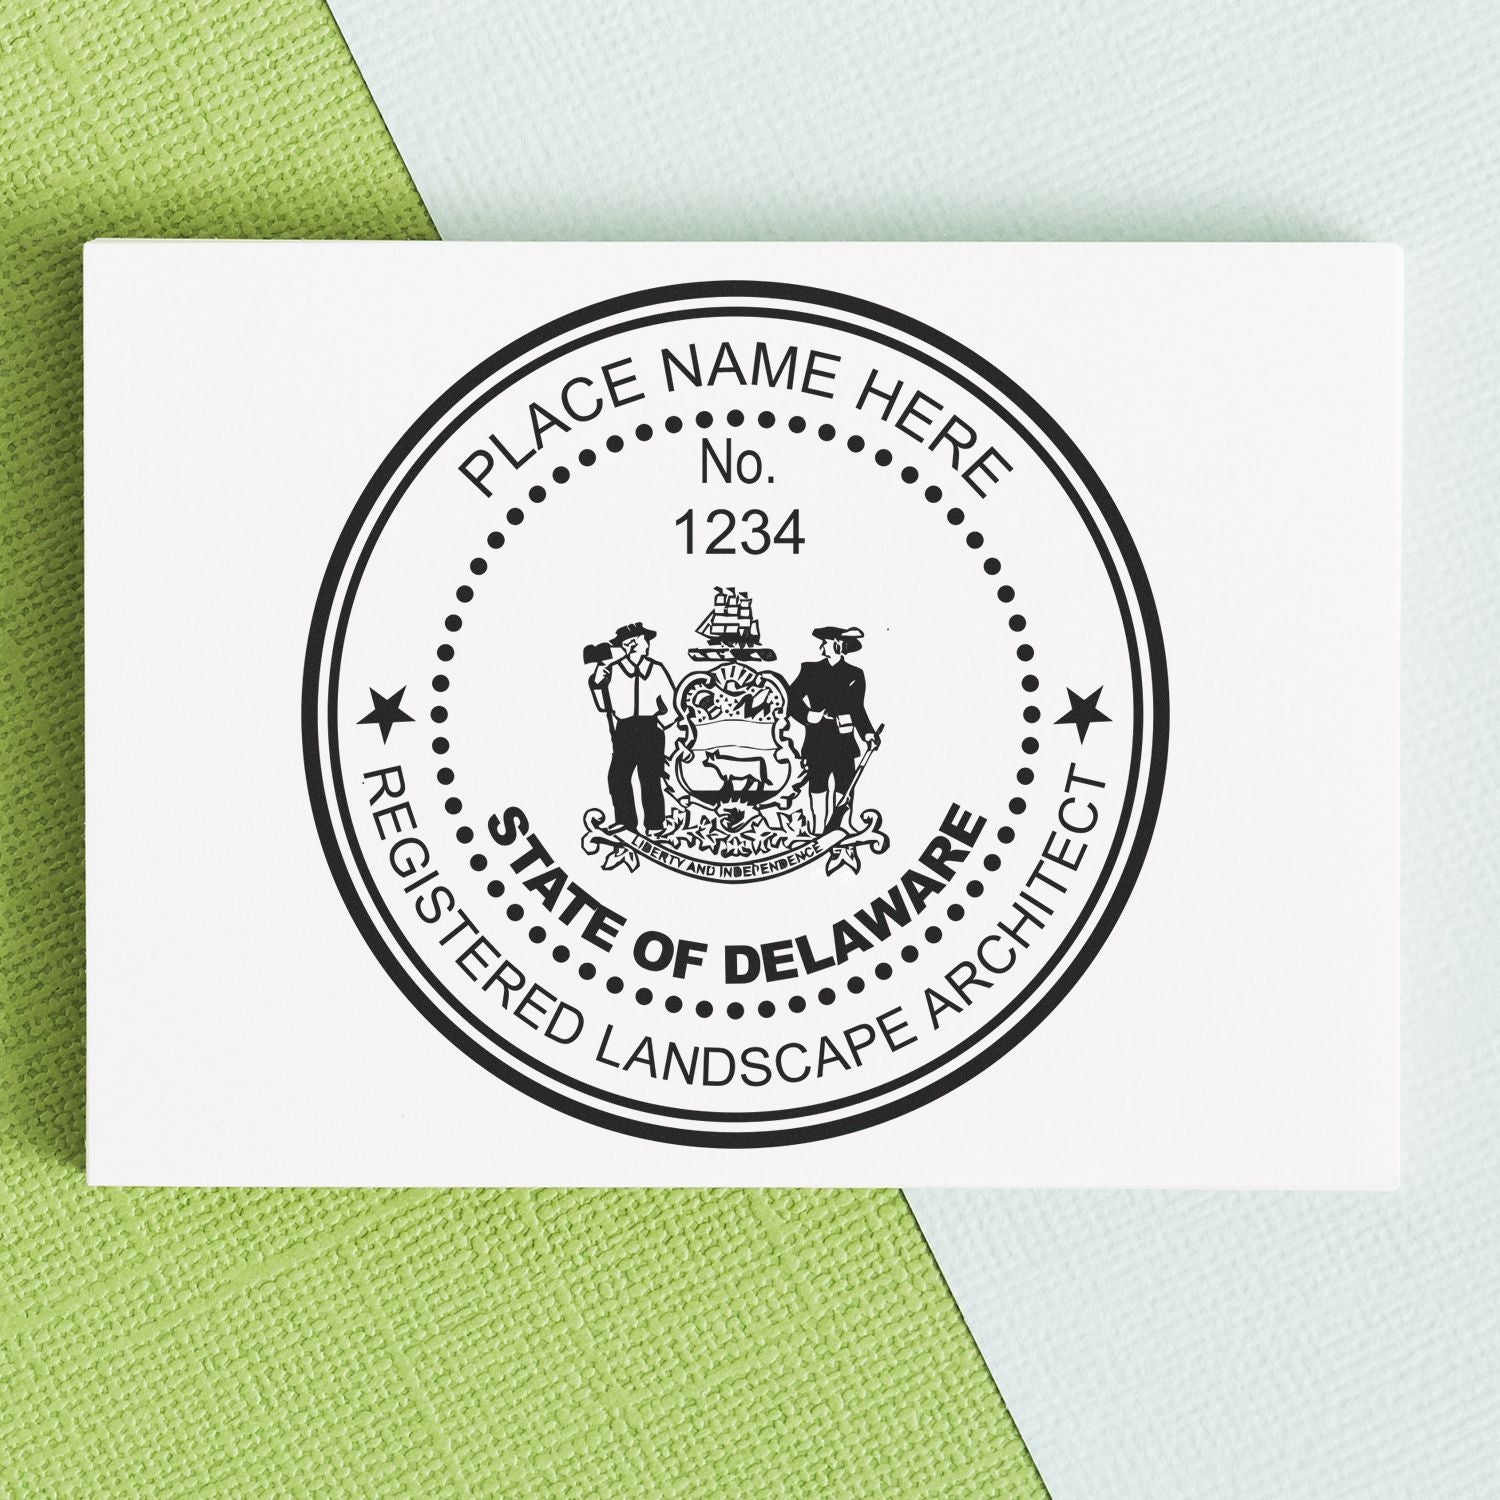 Premium MaxLight Pre-Inked Delaware Landscape Architectural Stamp in use photo showing a stamped imprint of the Premium MaxLight Pre-Inked Delaware Landscape Architectural Stamp